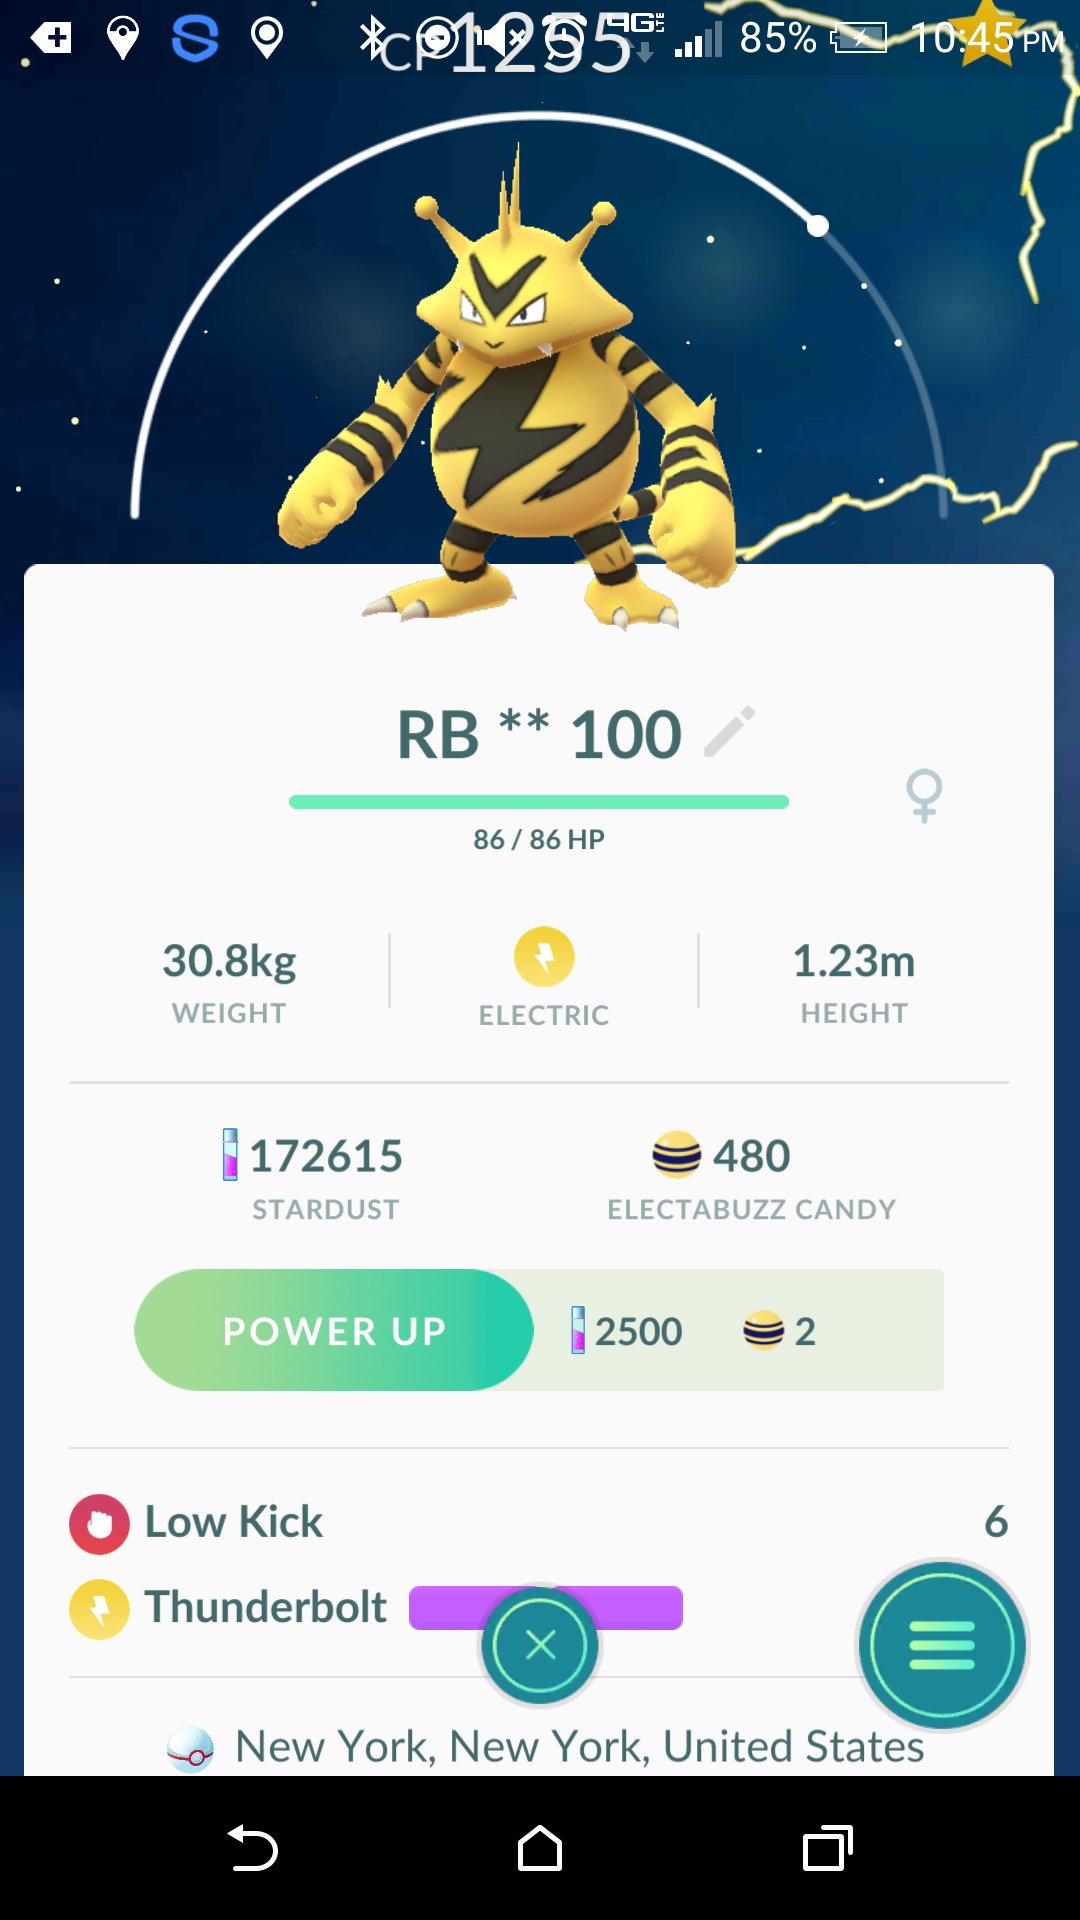 ✨Aipom✨ on Twitter: "Finally a 100% iv raid #electabuzz #PokemonGO https://t.co/fihw0cPBq1" / Twitter